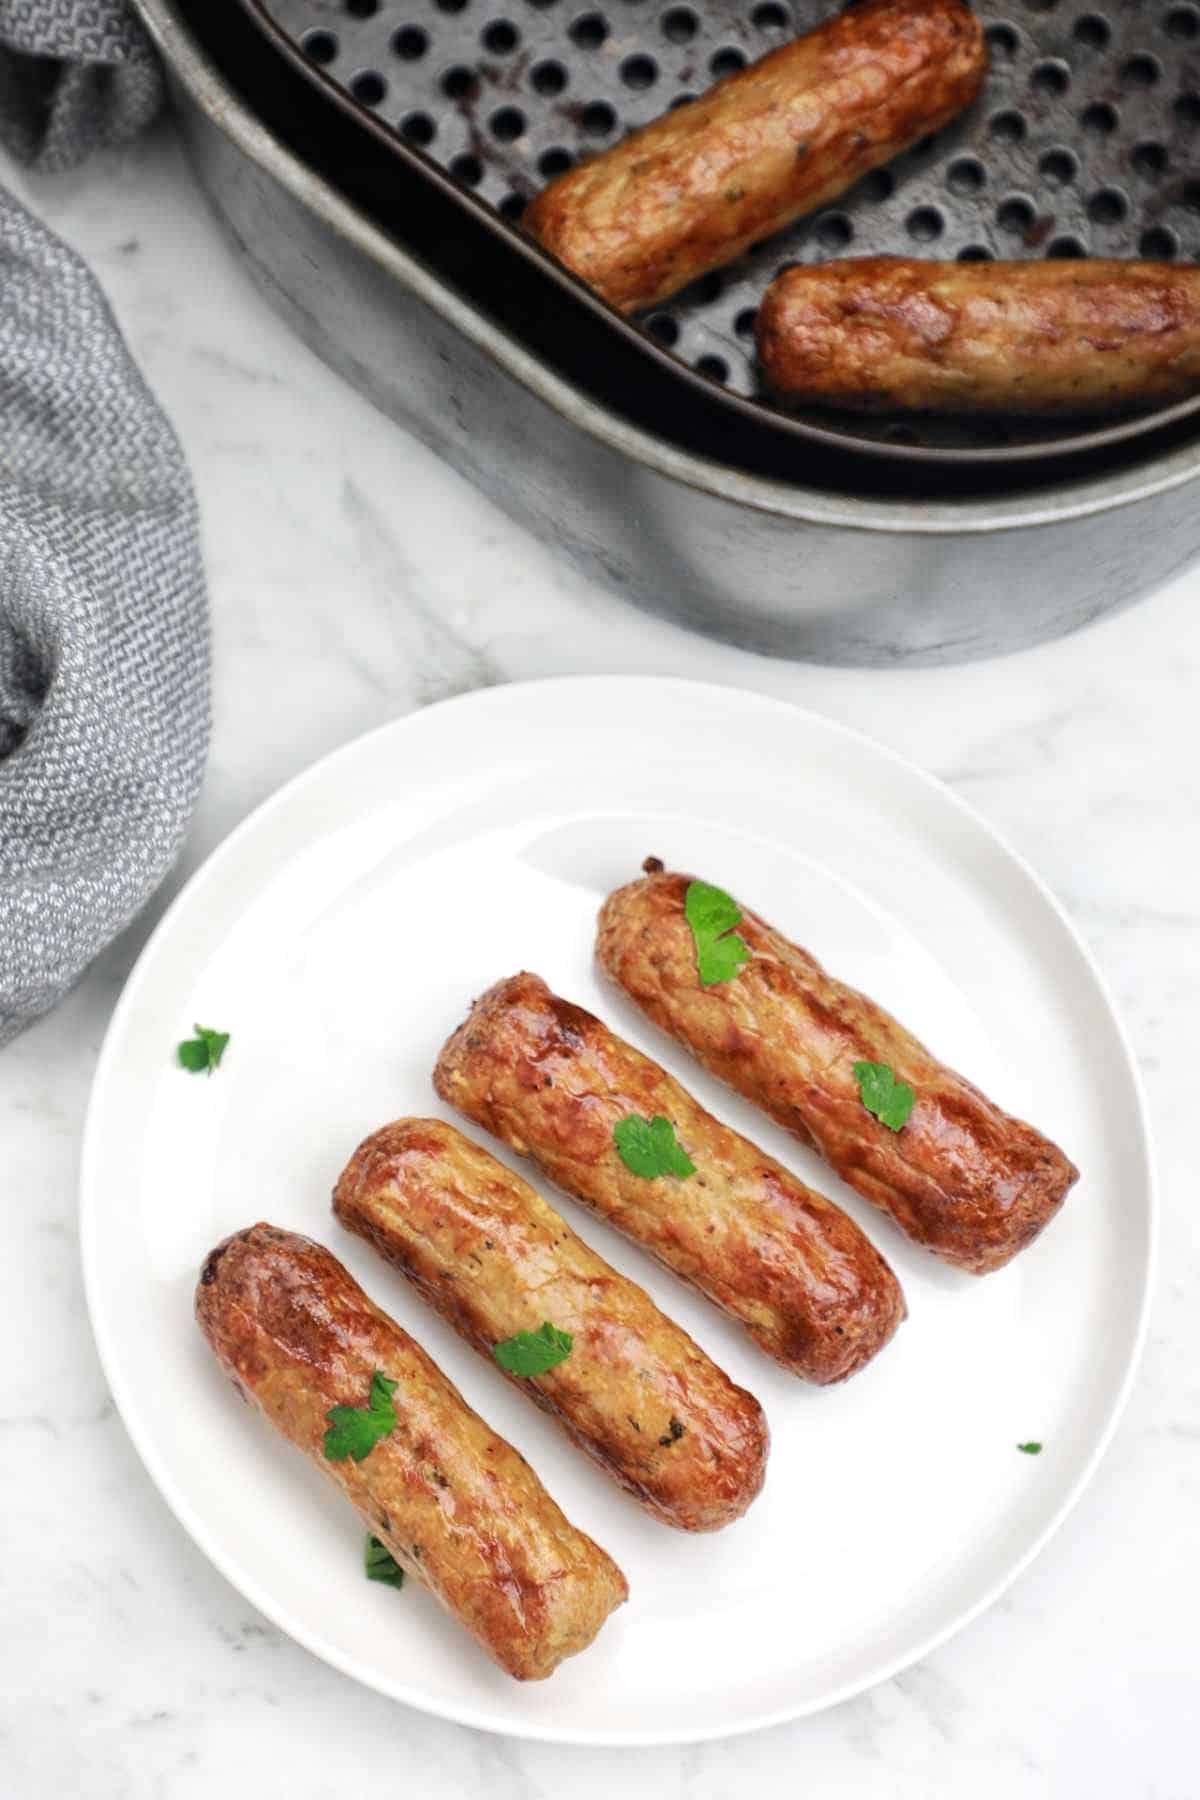 sausages on a plate and in air fryer.